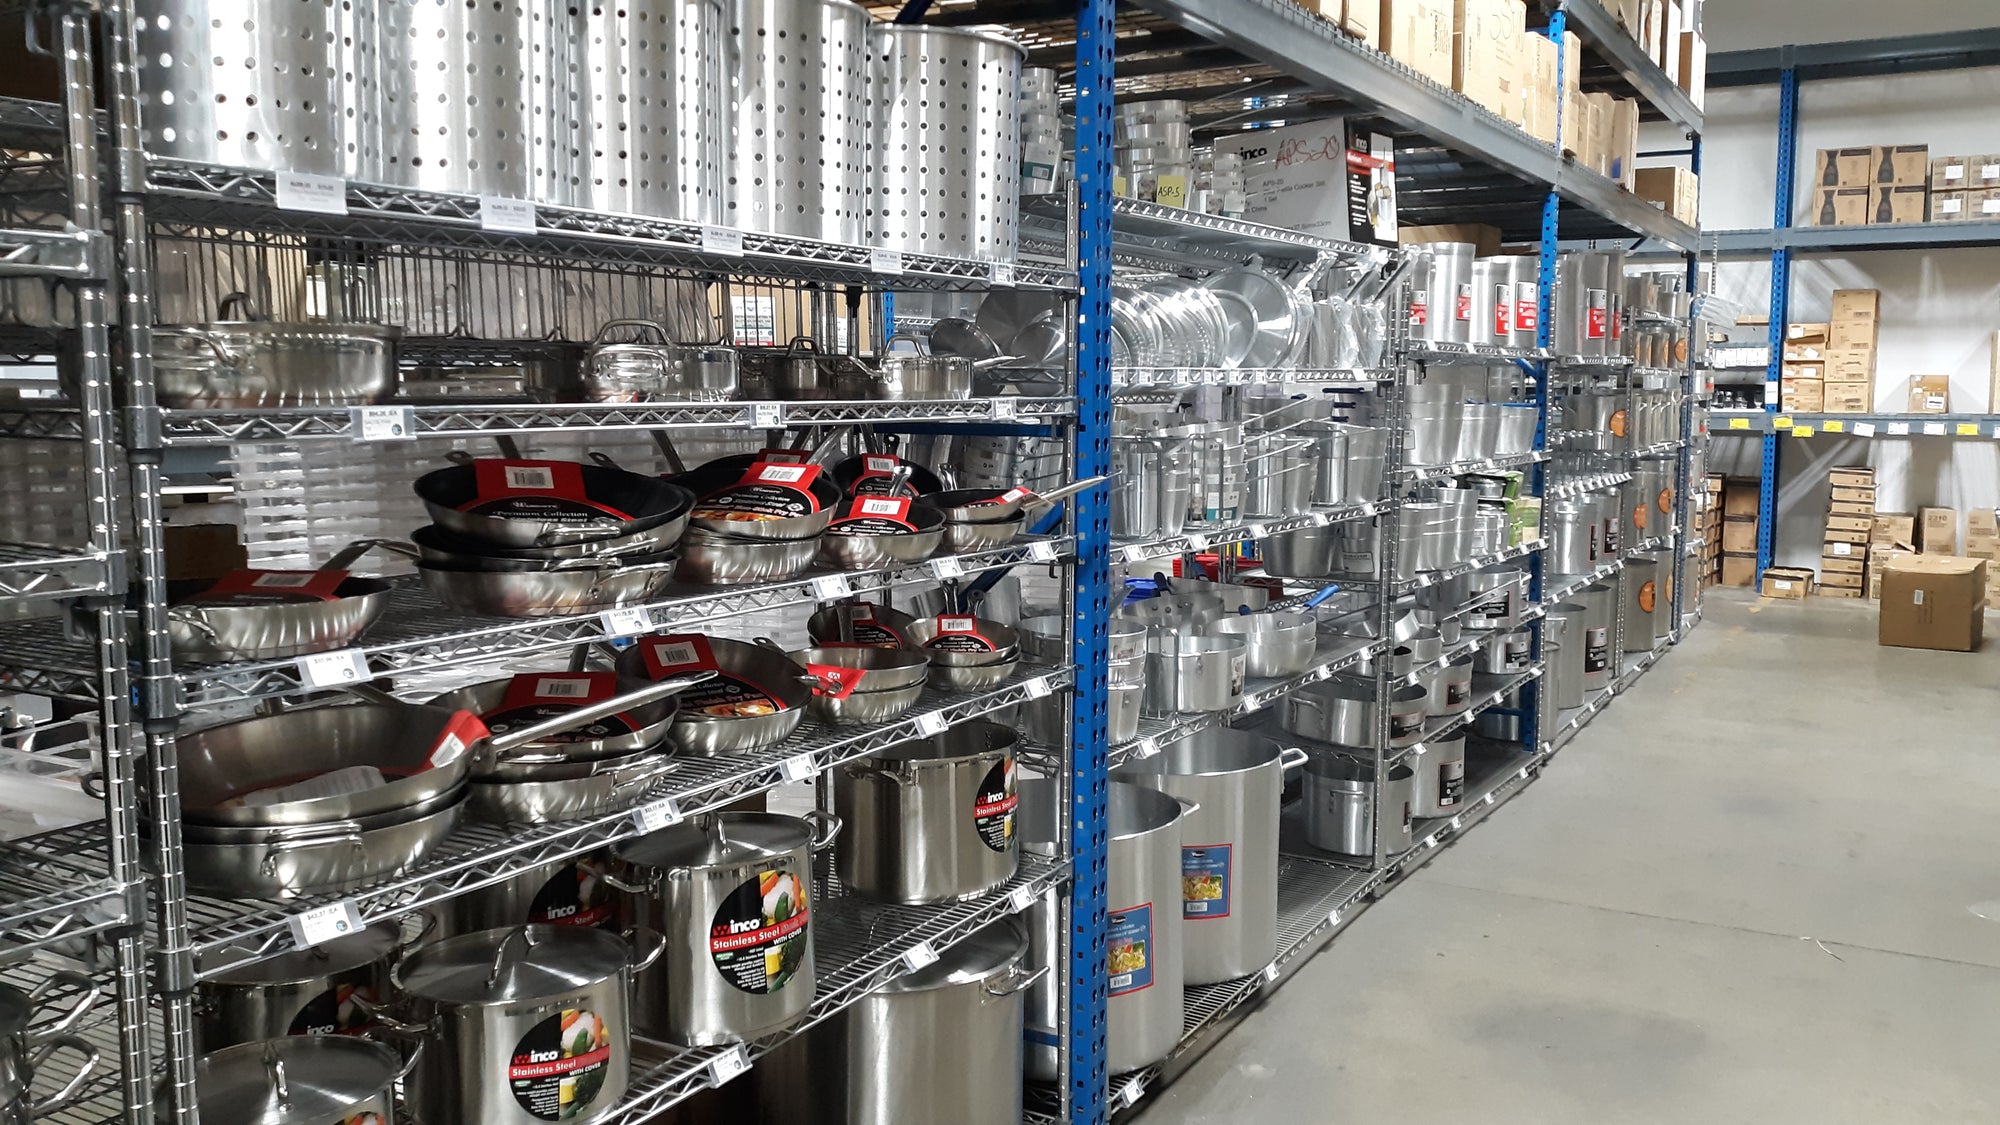 All of the saute pans, stock pots, colanders, pans that a busy restaurant needs!